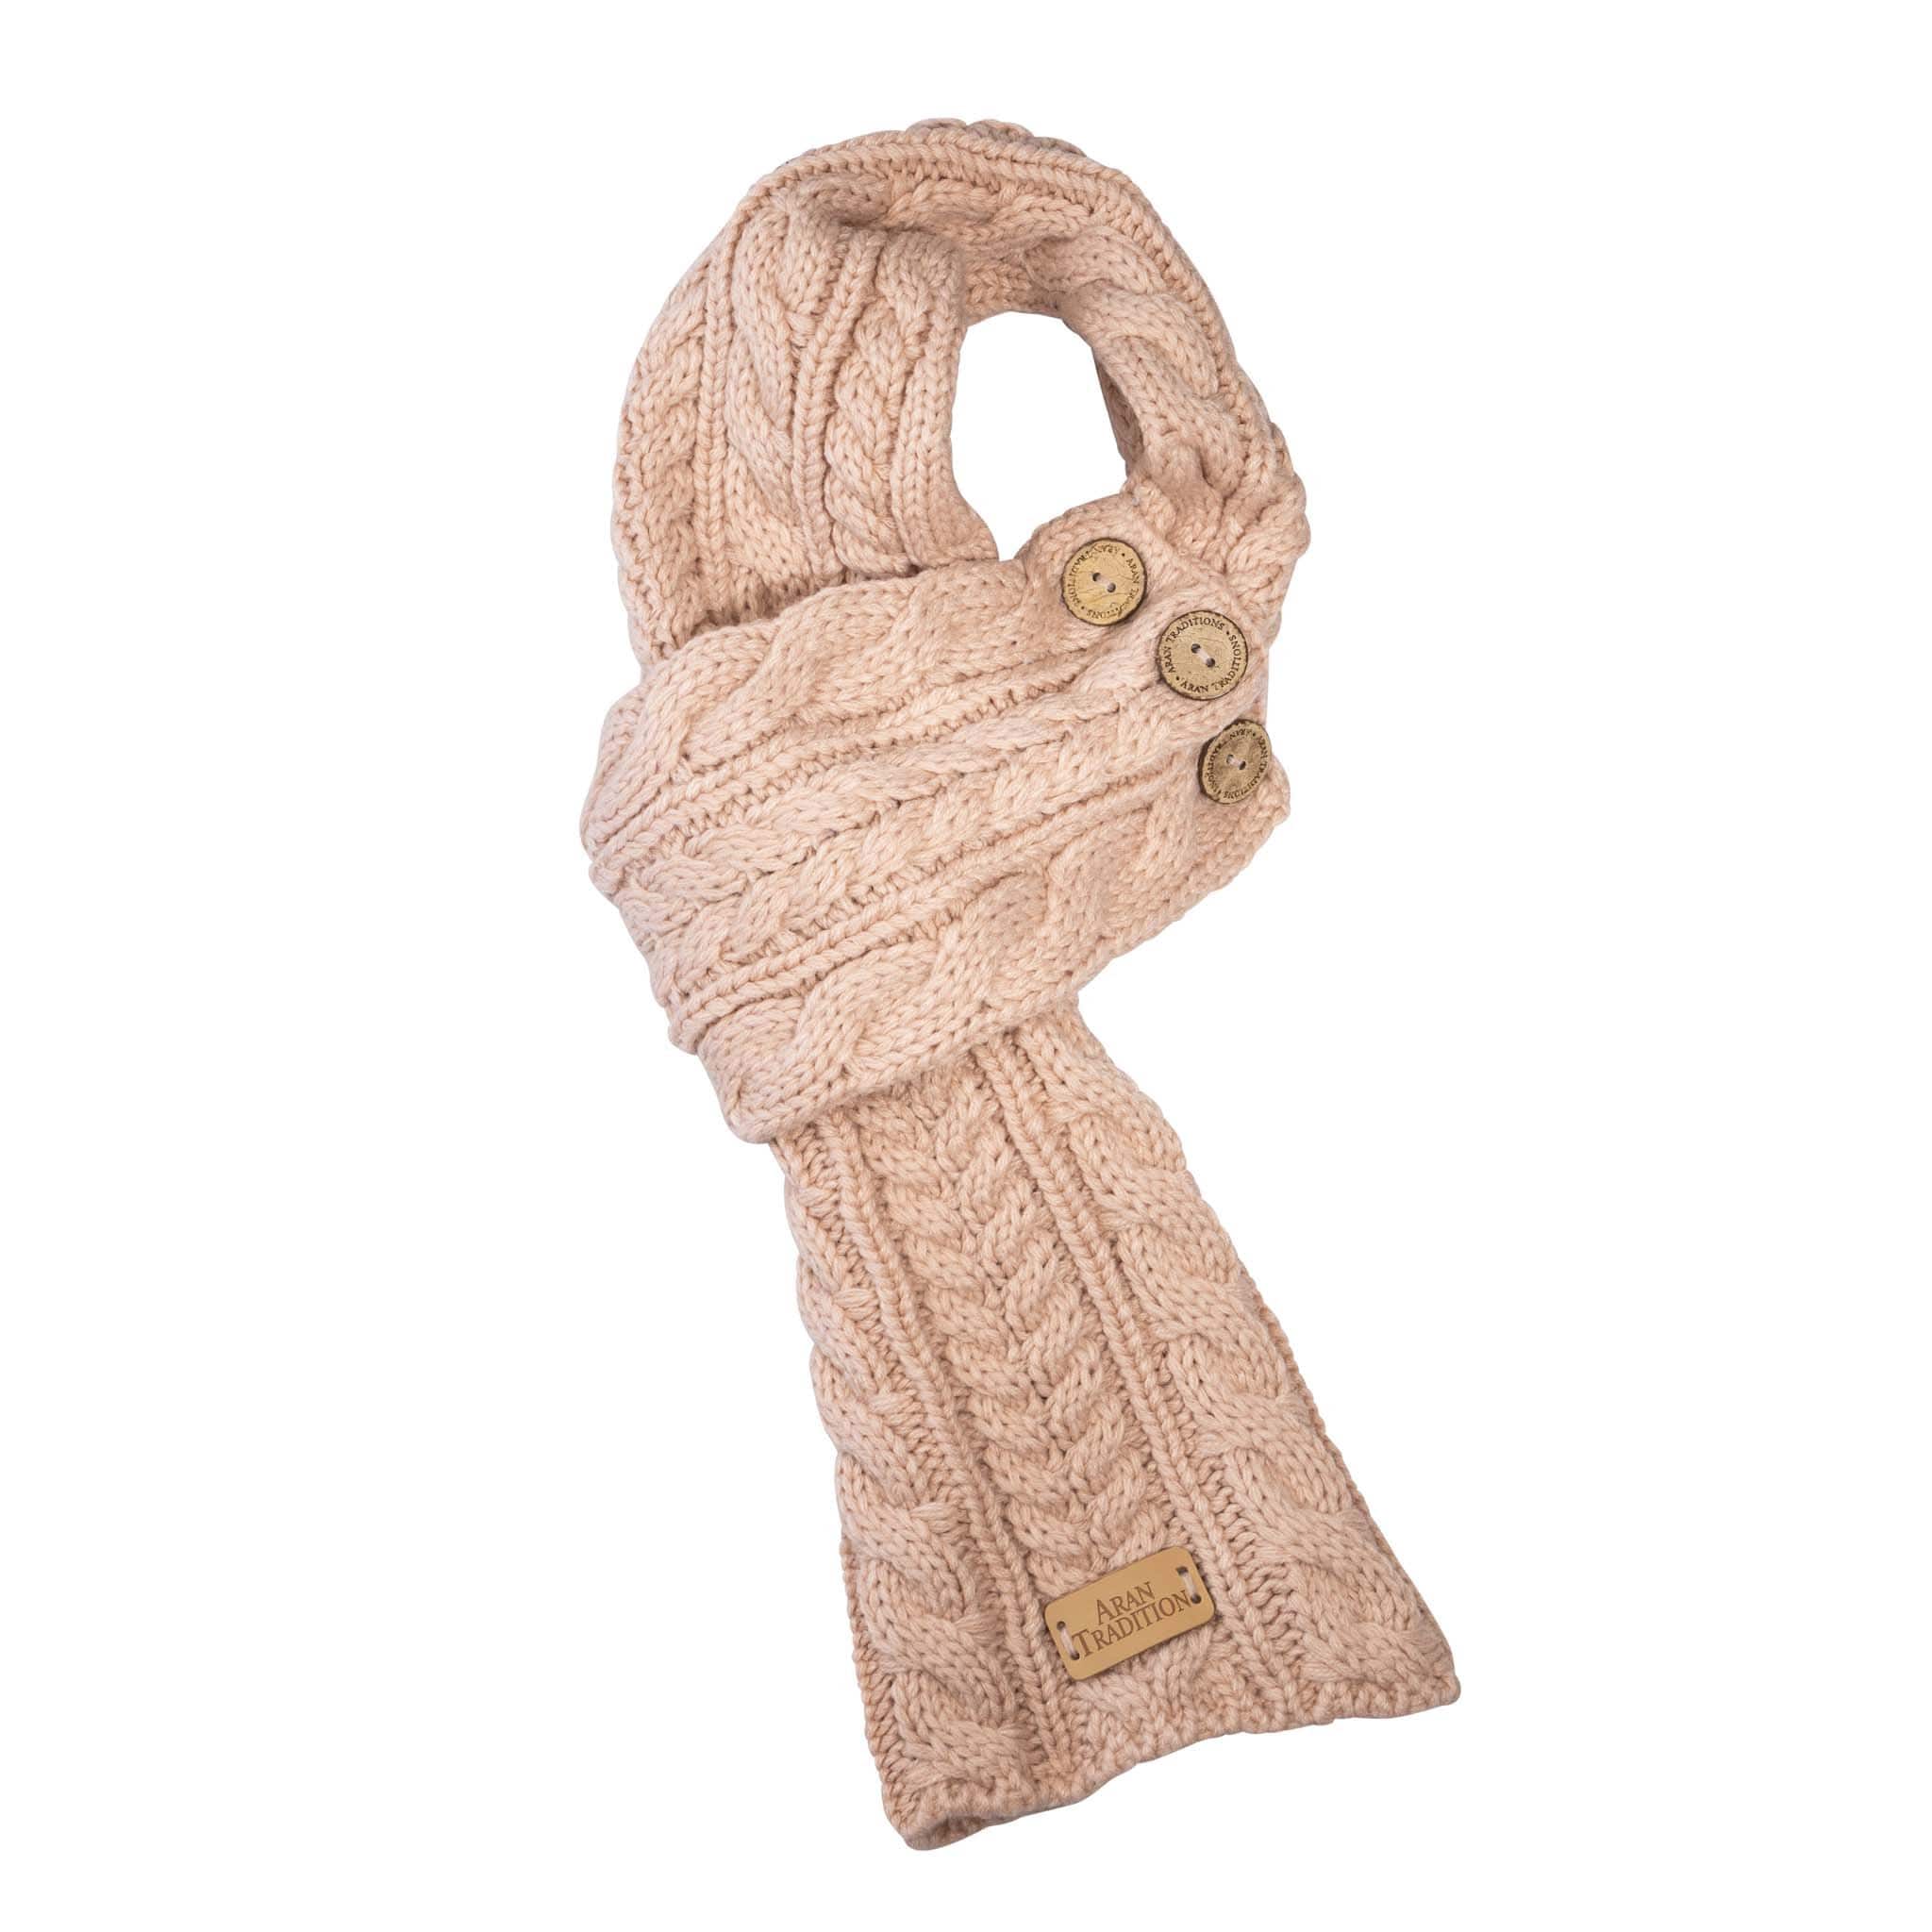 Aran Traditions Cable Knit Scarf: Timeless Warmth and Style